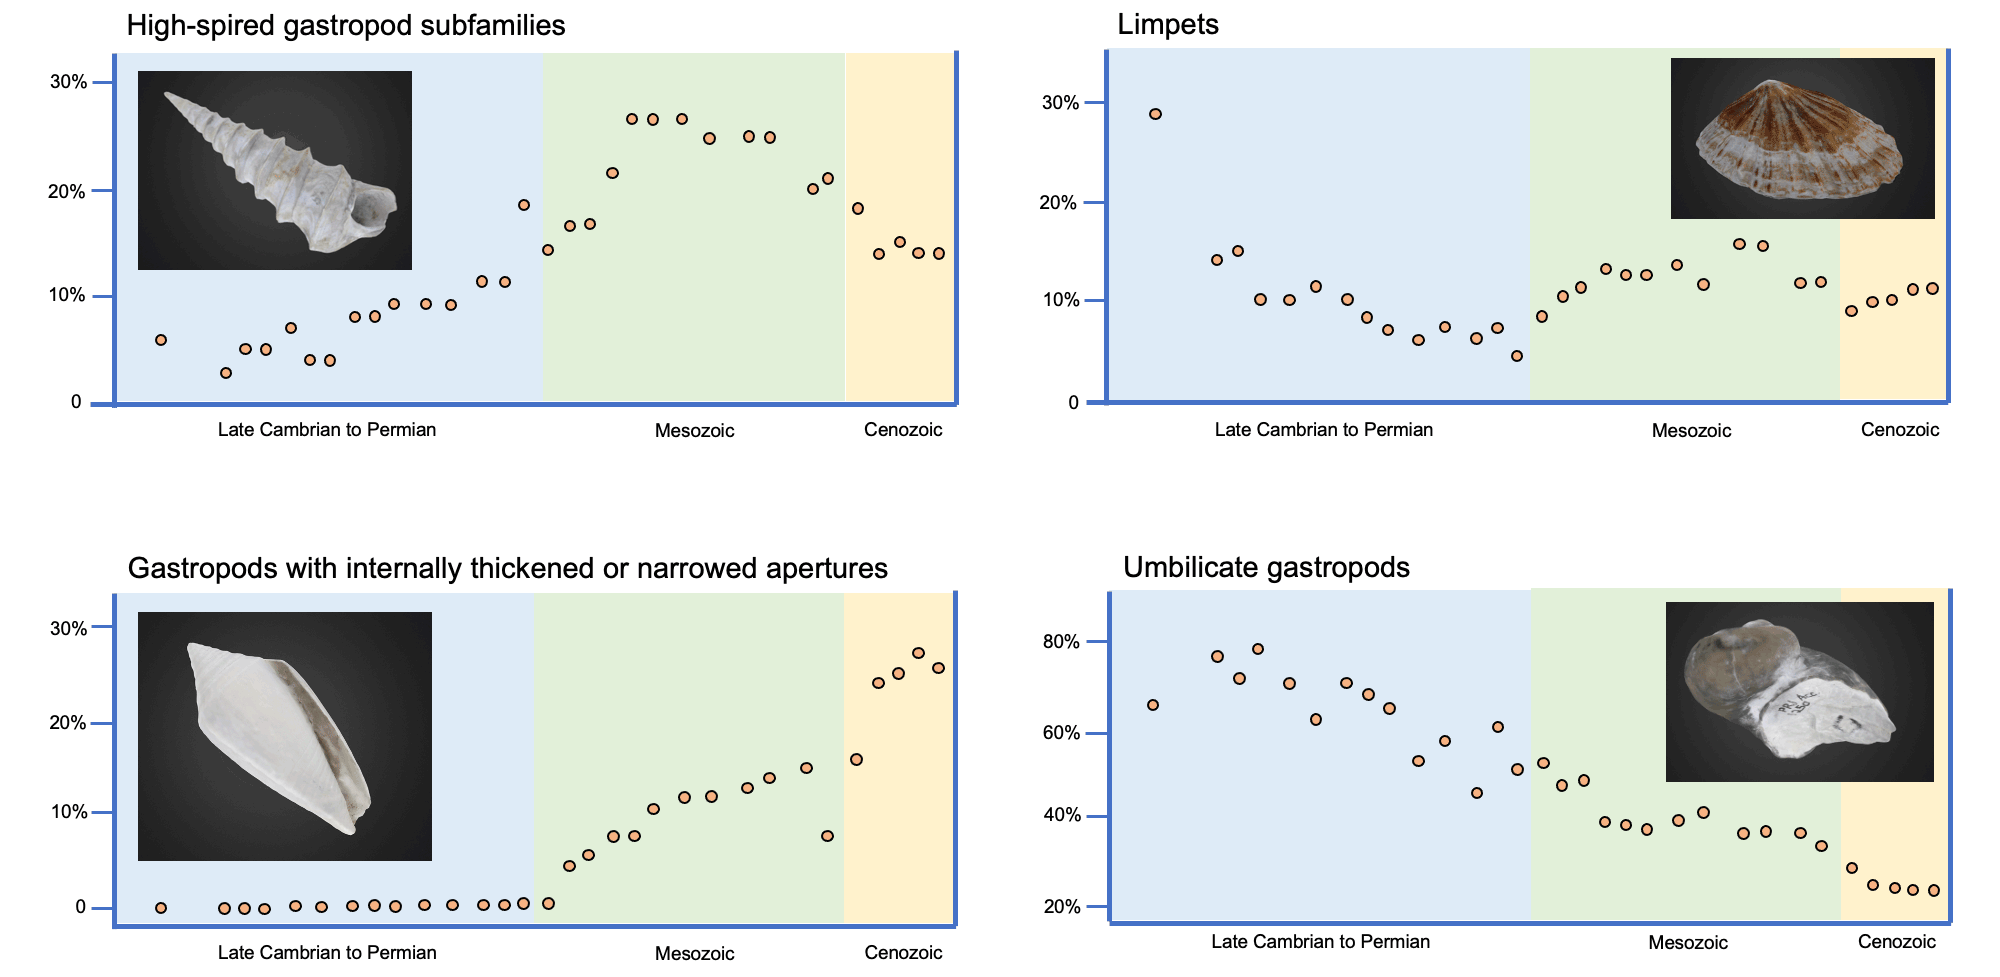 Four graphs showing the number of subfamilial groups of gastropods over time with different types of shell features, including high spires, limpet shapes, internally thickened shells or narrow apertures, and umbilicate forms.